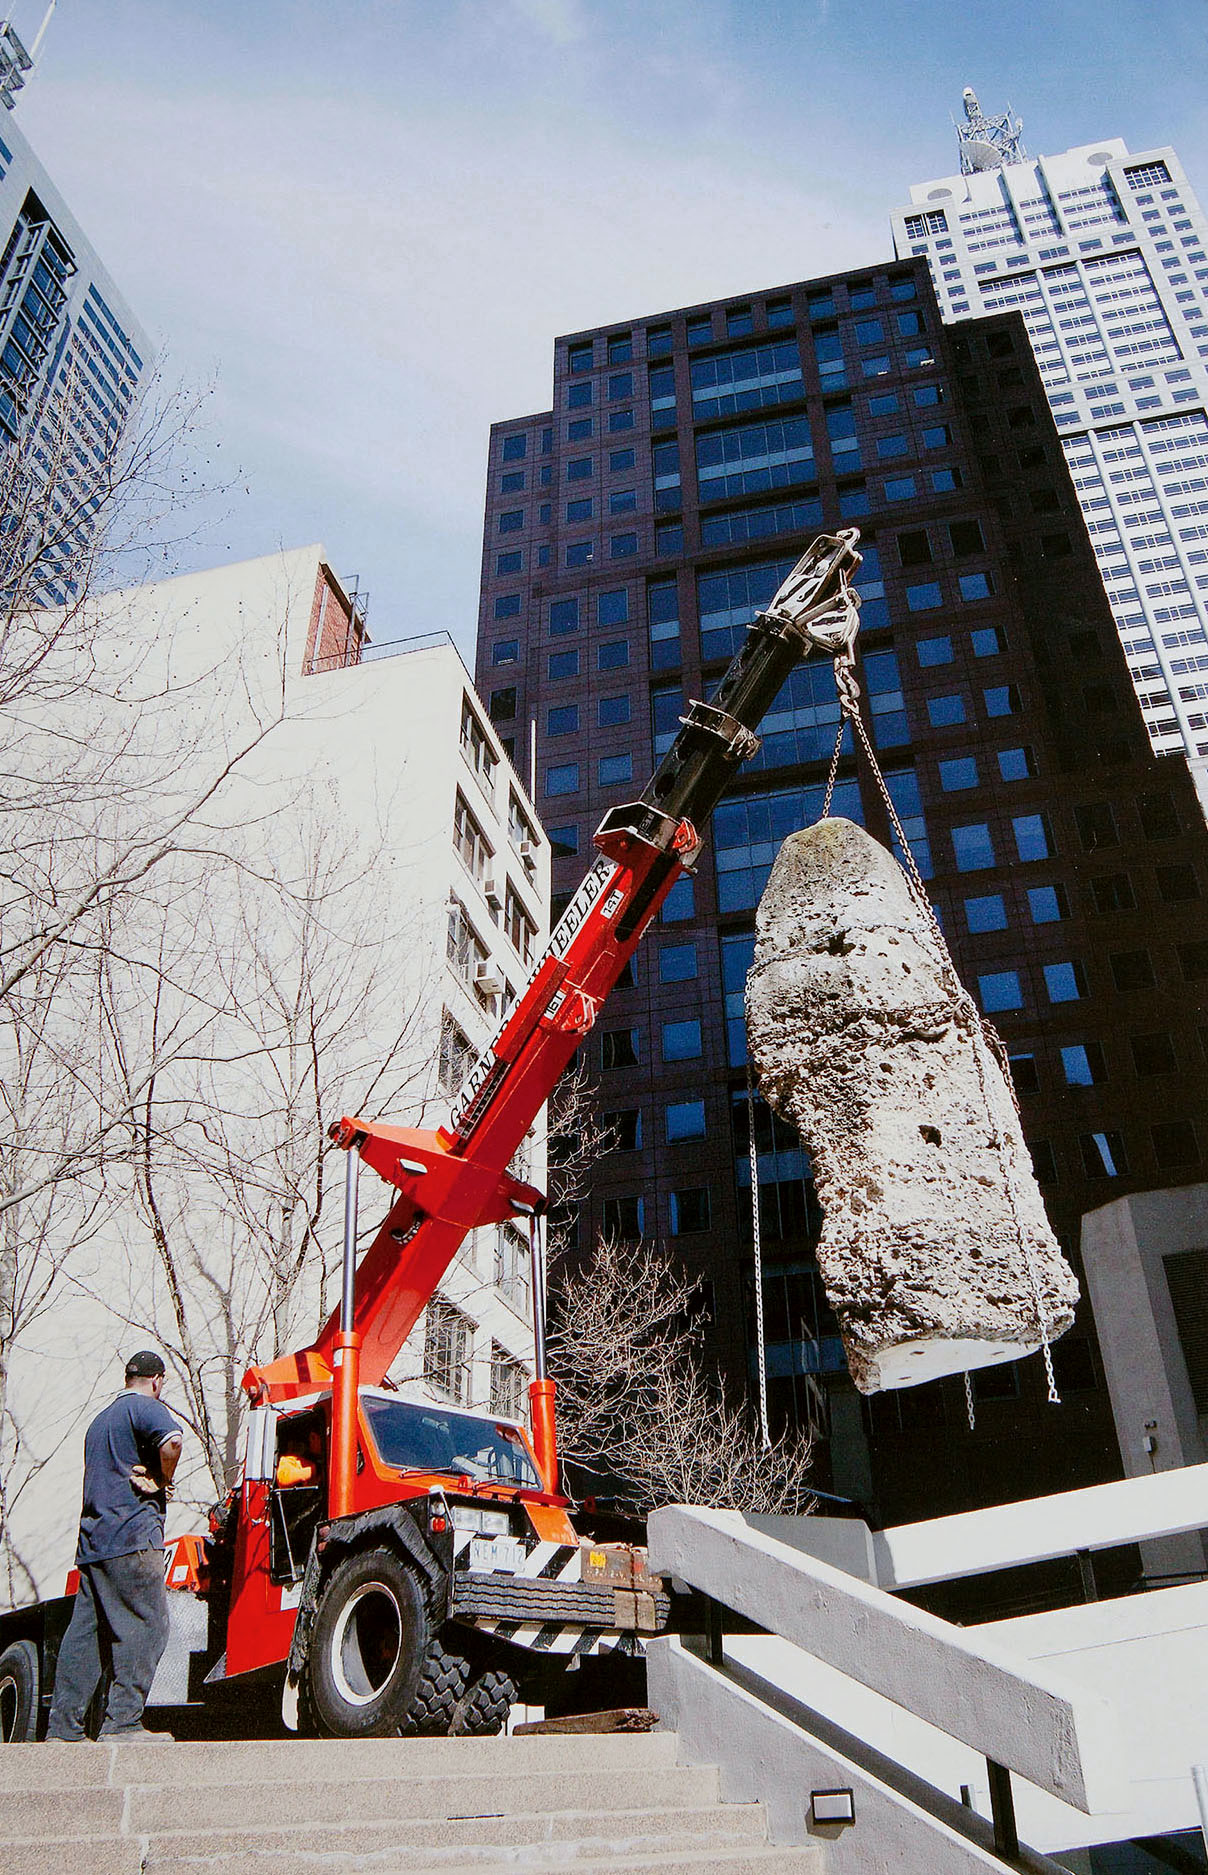 August 28, 2005. The Limestone Pinnacles at Nauru House in Melbourne, Victoria in the process of being relocated to Flinders. Photographer: Peter Glenane/Newspix. Copyright: News Corp Australia.